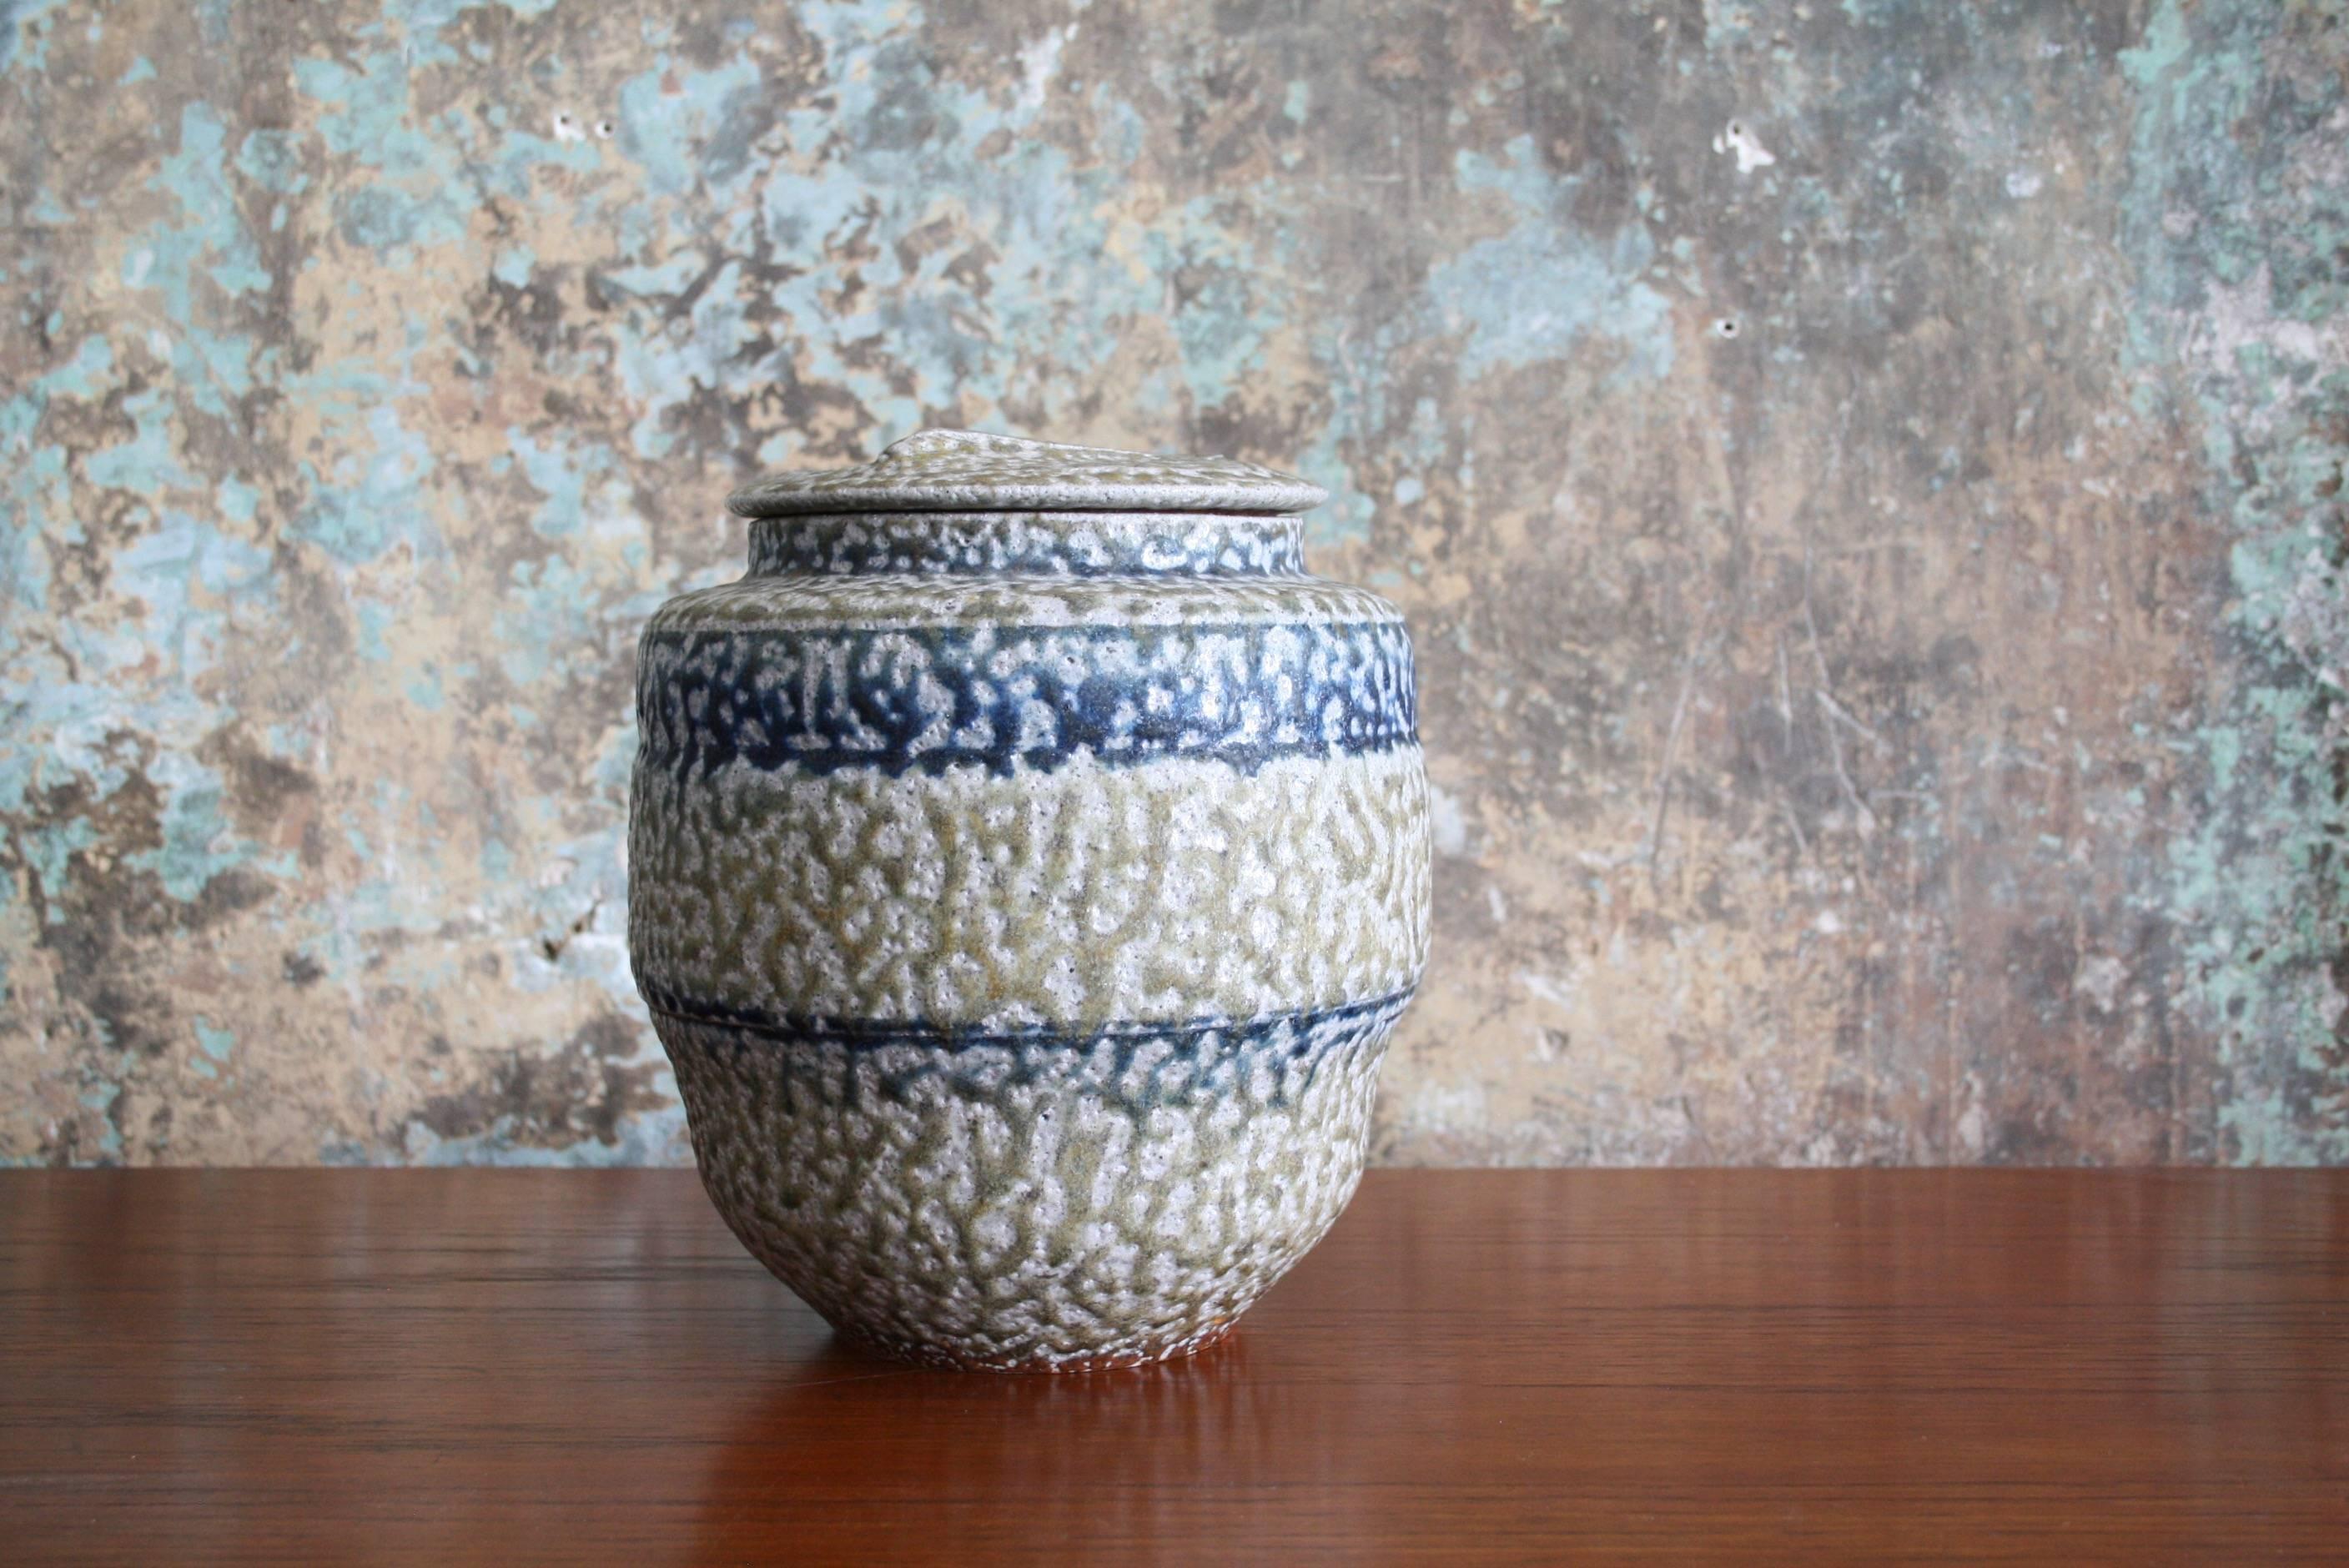 A salt-glazed, functional lidded stoneware vessel by highly regarded ceramic artist Karen Karnes (American, 1925-2016). This fluted round vessel includes a removable domed lid and features a beige body with cobalt blue stripes and an overall white